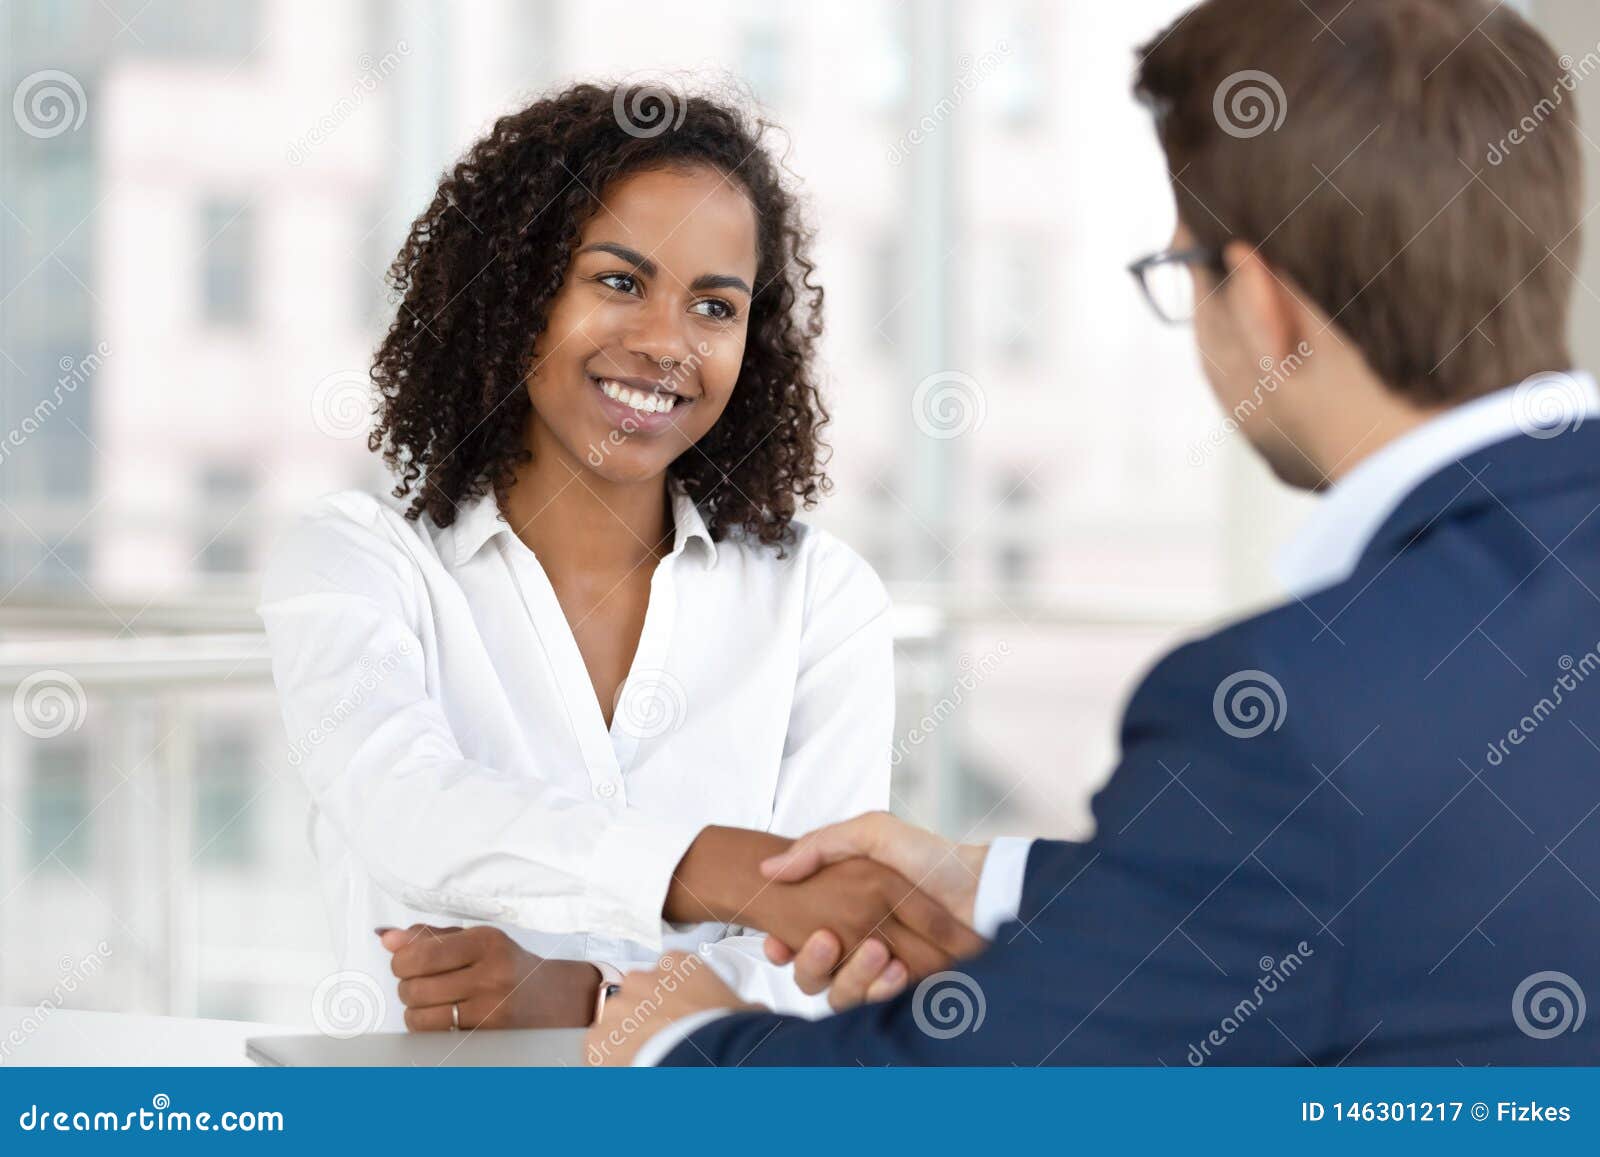 smiling african hr manager handshake hire candidate at job interview